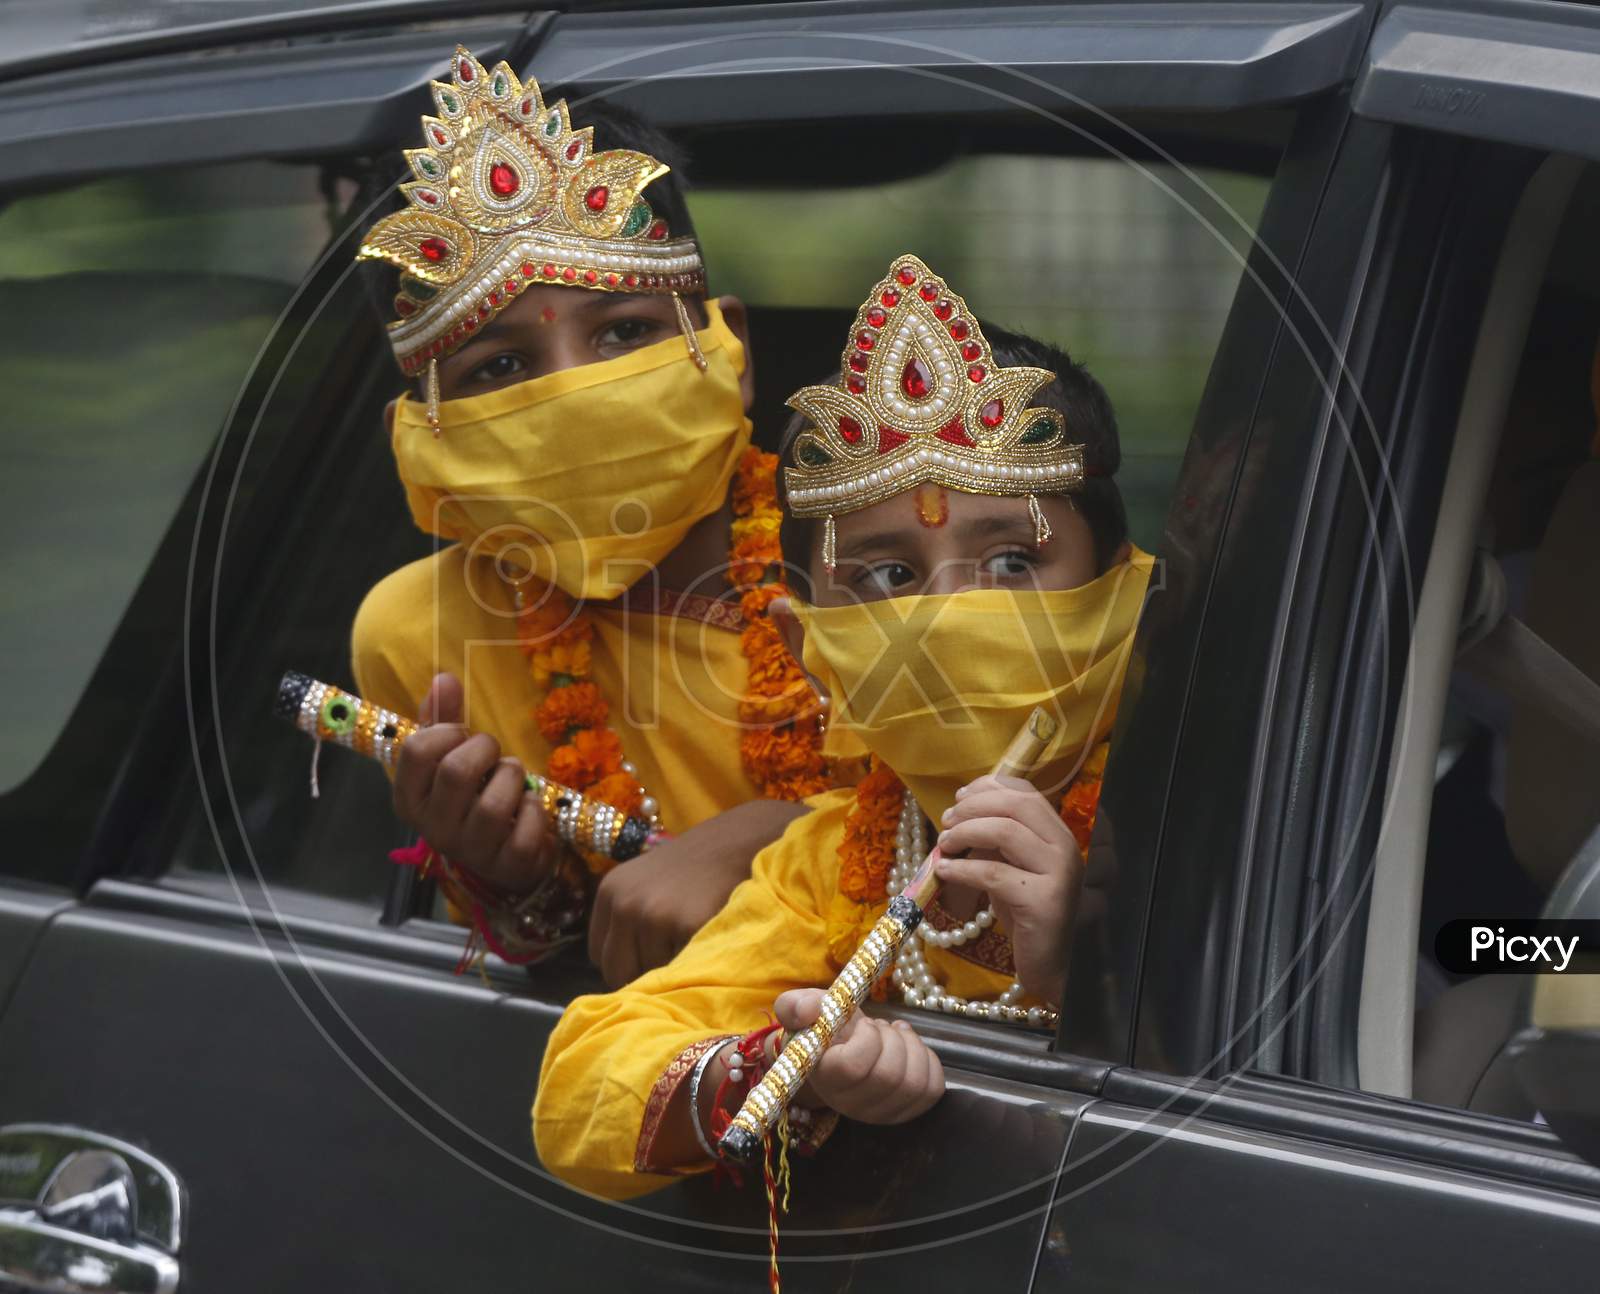 Children wear mask, dressed as Hindu Lord Krishna ride in a car during Janmashtami celebrations, in Chandigarh August 11, 2020